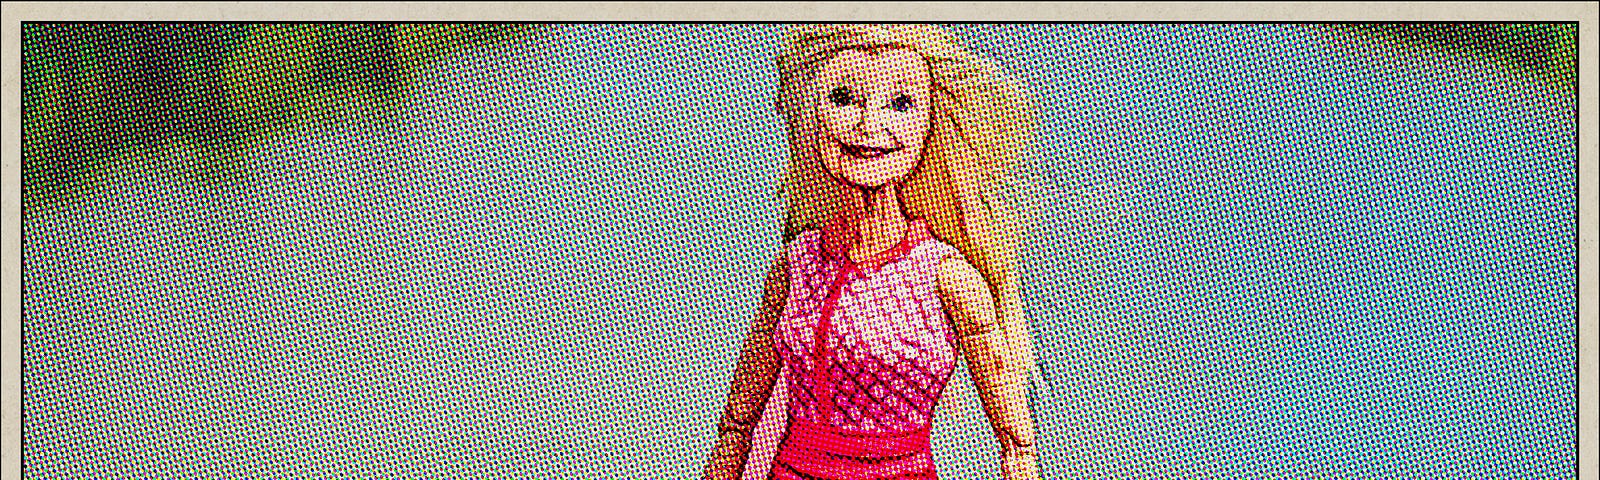 Barbie Doll at 80